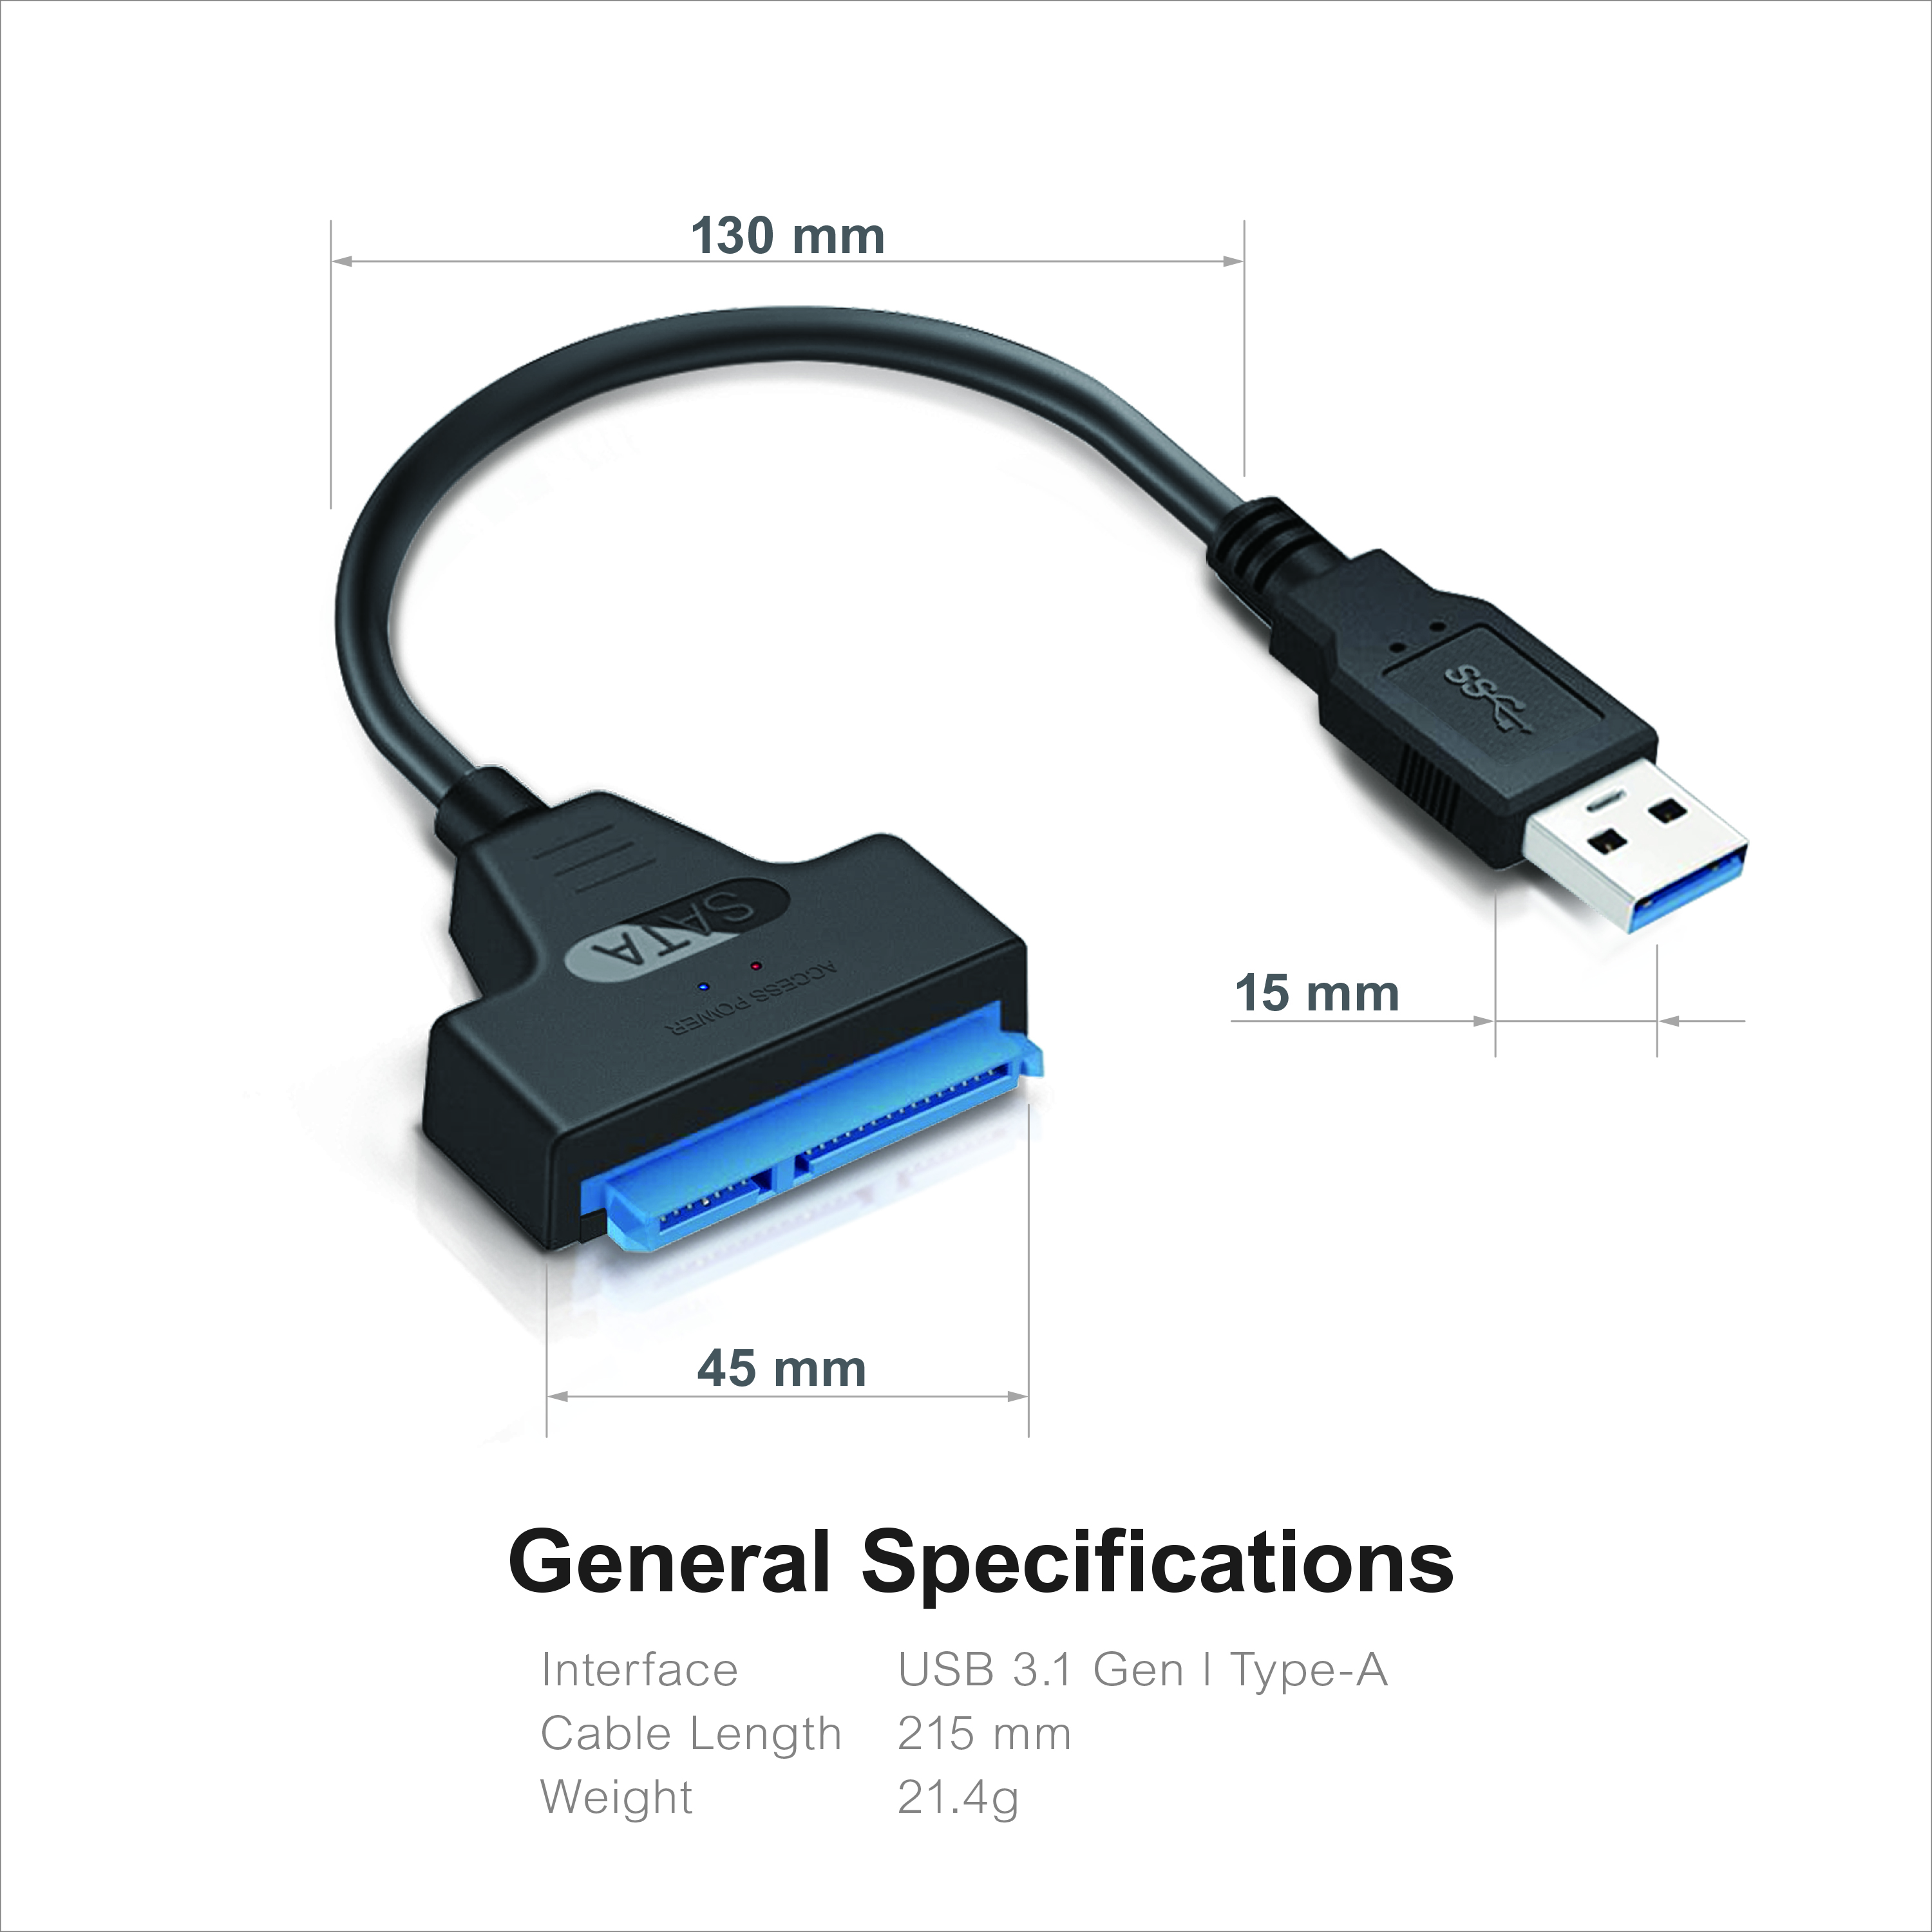 Mediasonic SATA to USB Cable – USB 3.0 / USB 3.1 Gen 1 to 2.5” SATA SSD / Hard Drive Adapter Cable (Optimized for SSD, Support UASP and SATA 3 6.0Gbps transfer rate) (HND5-SU3) - image 2 of 6